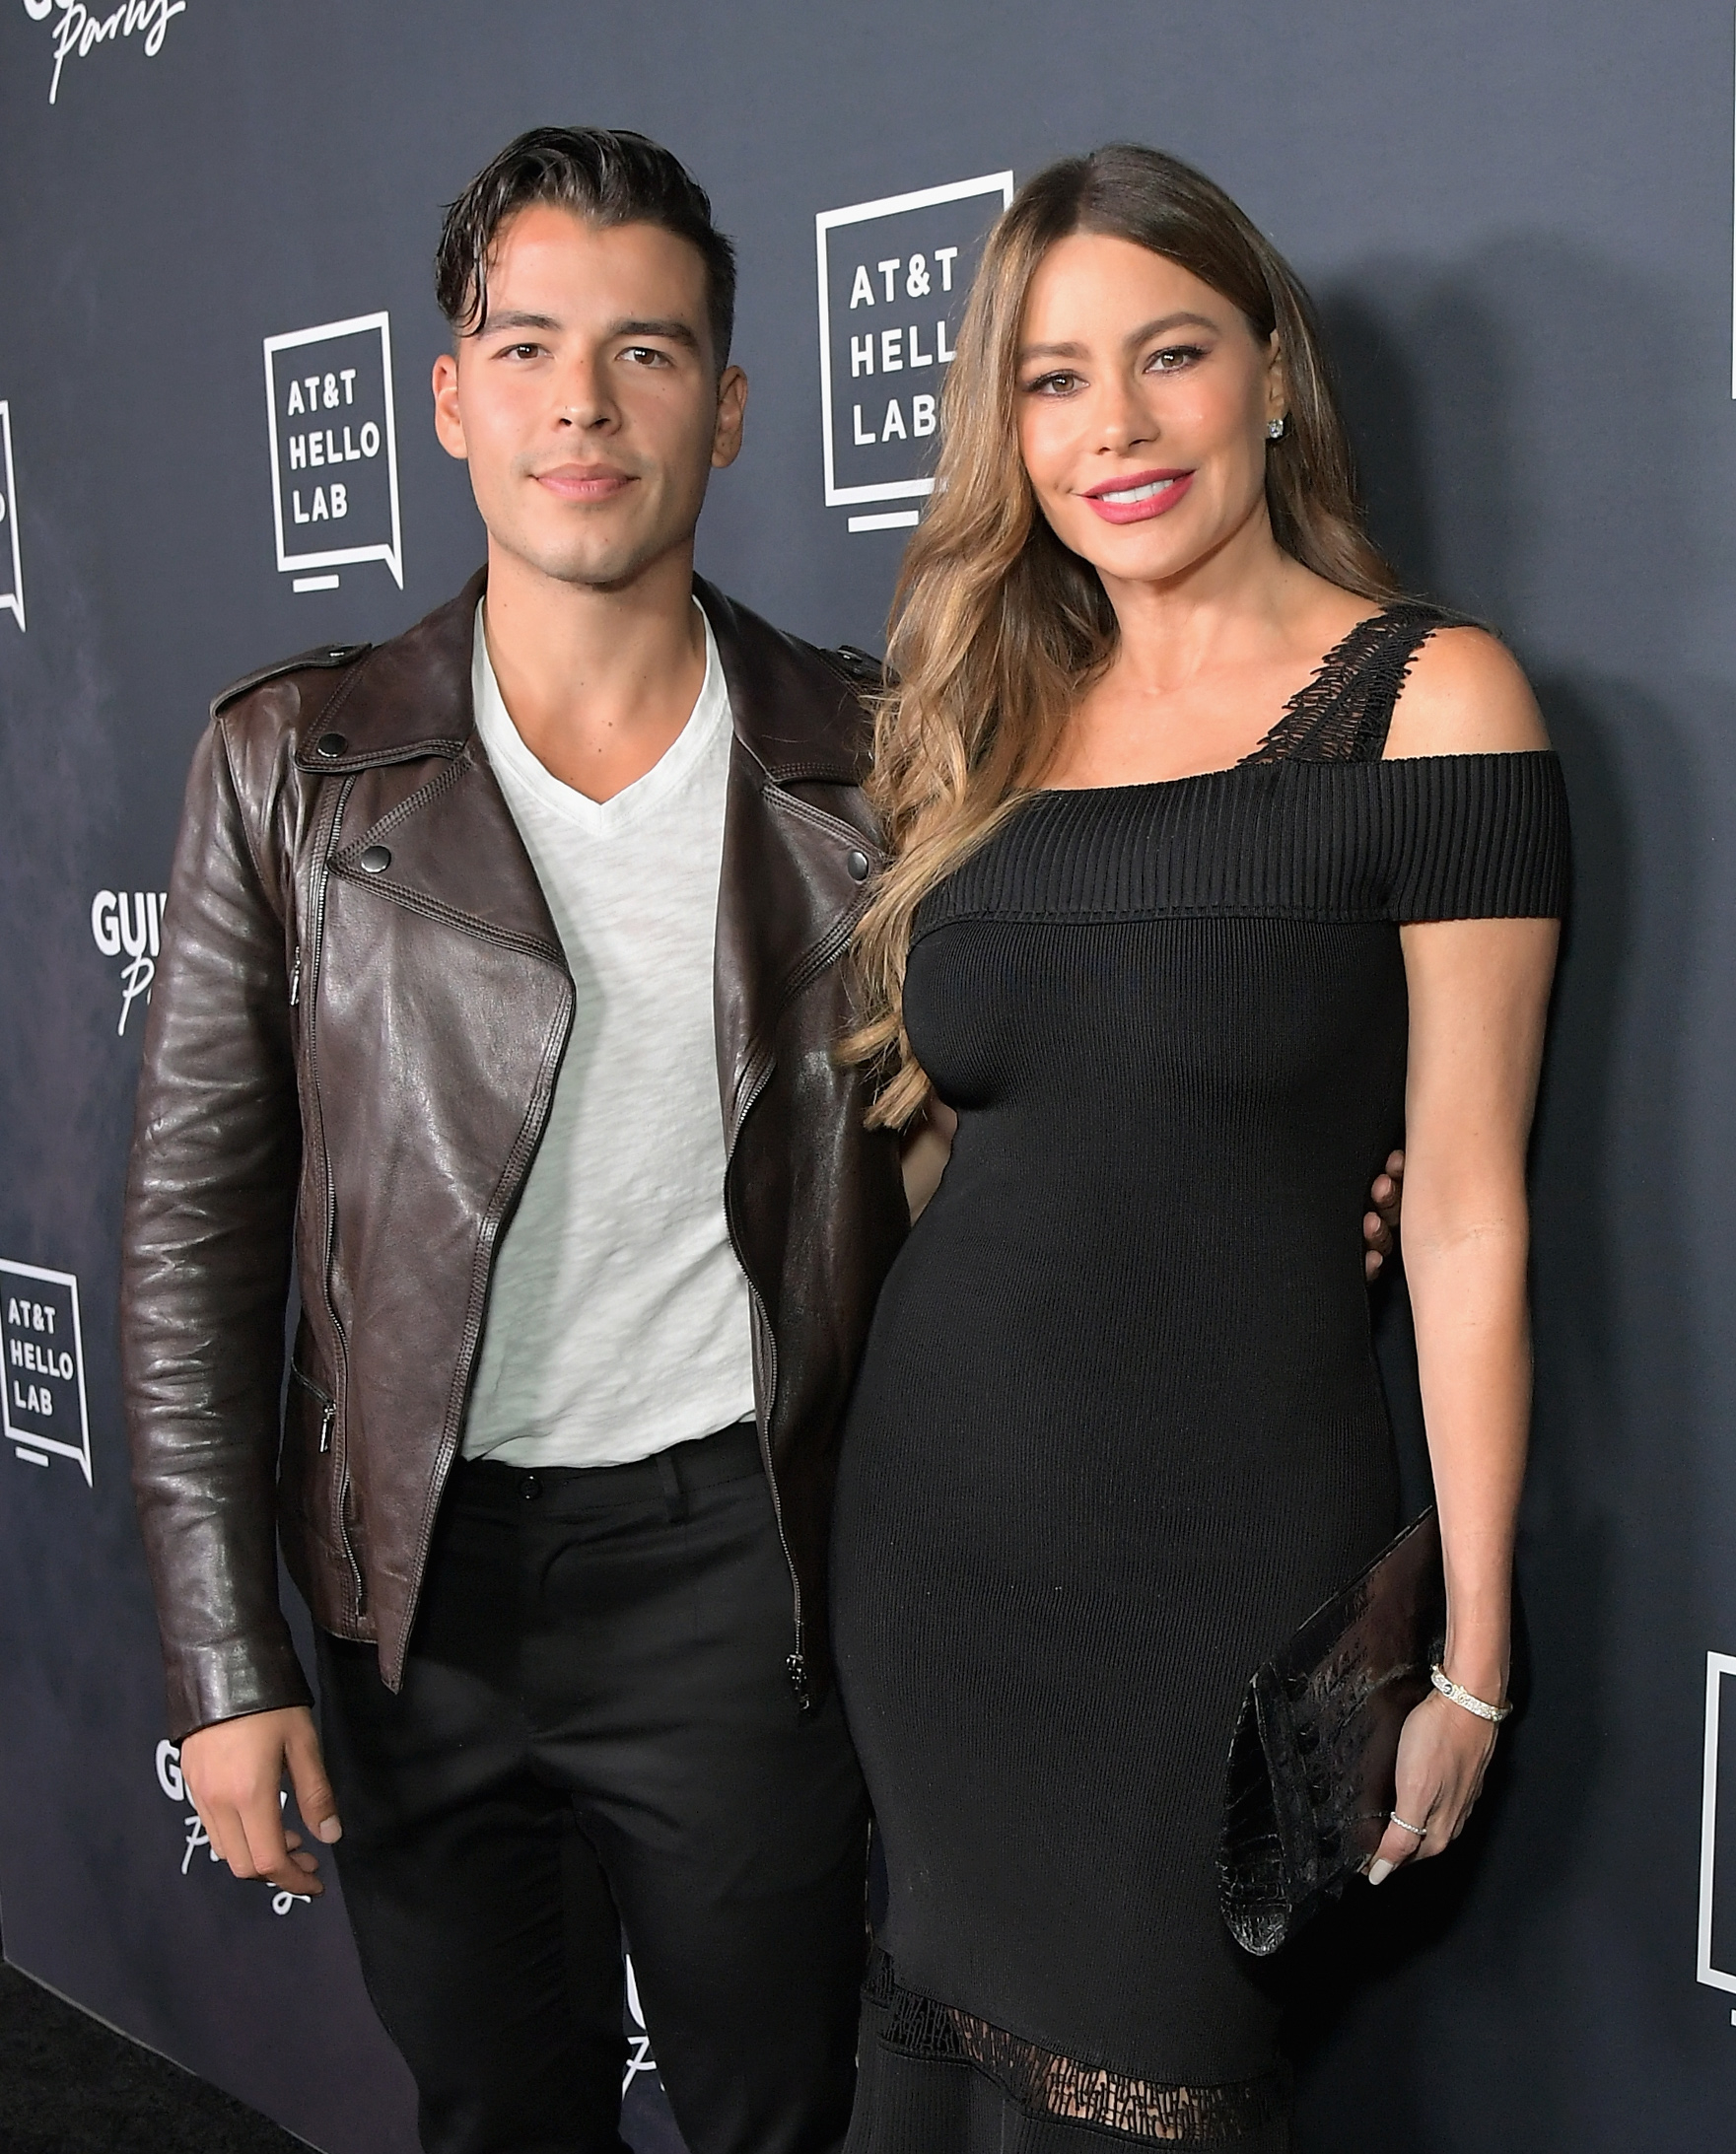 Manolo Vergara wearing a leather jacket, v-neck shirt and dark pants and Sofía Vergara wearing a black strapless dress posing together on the red carpet